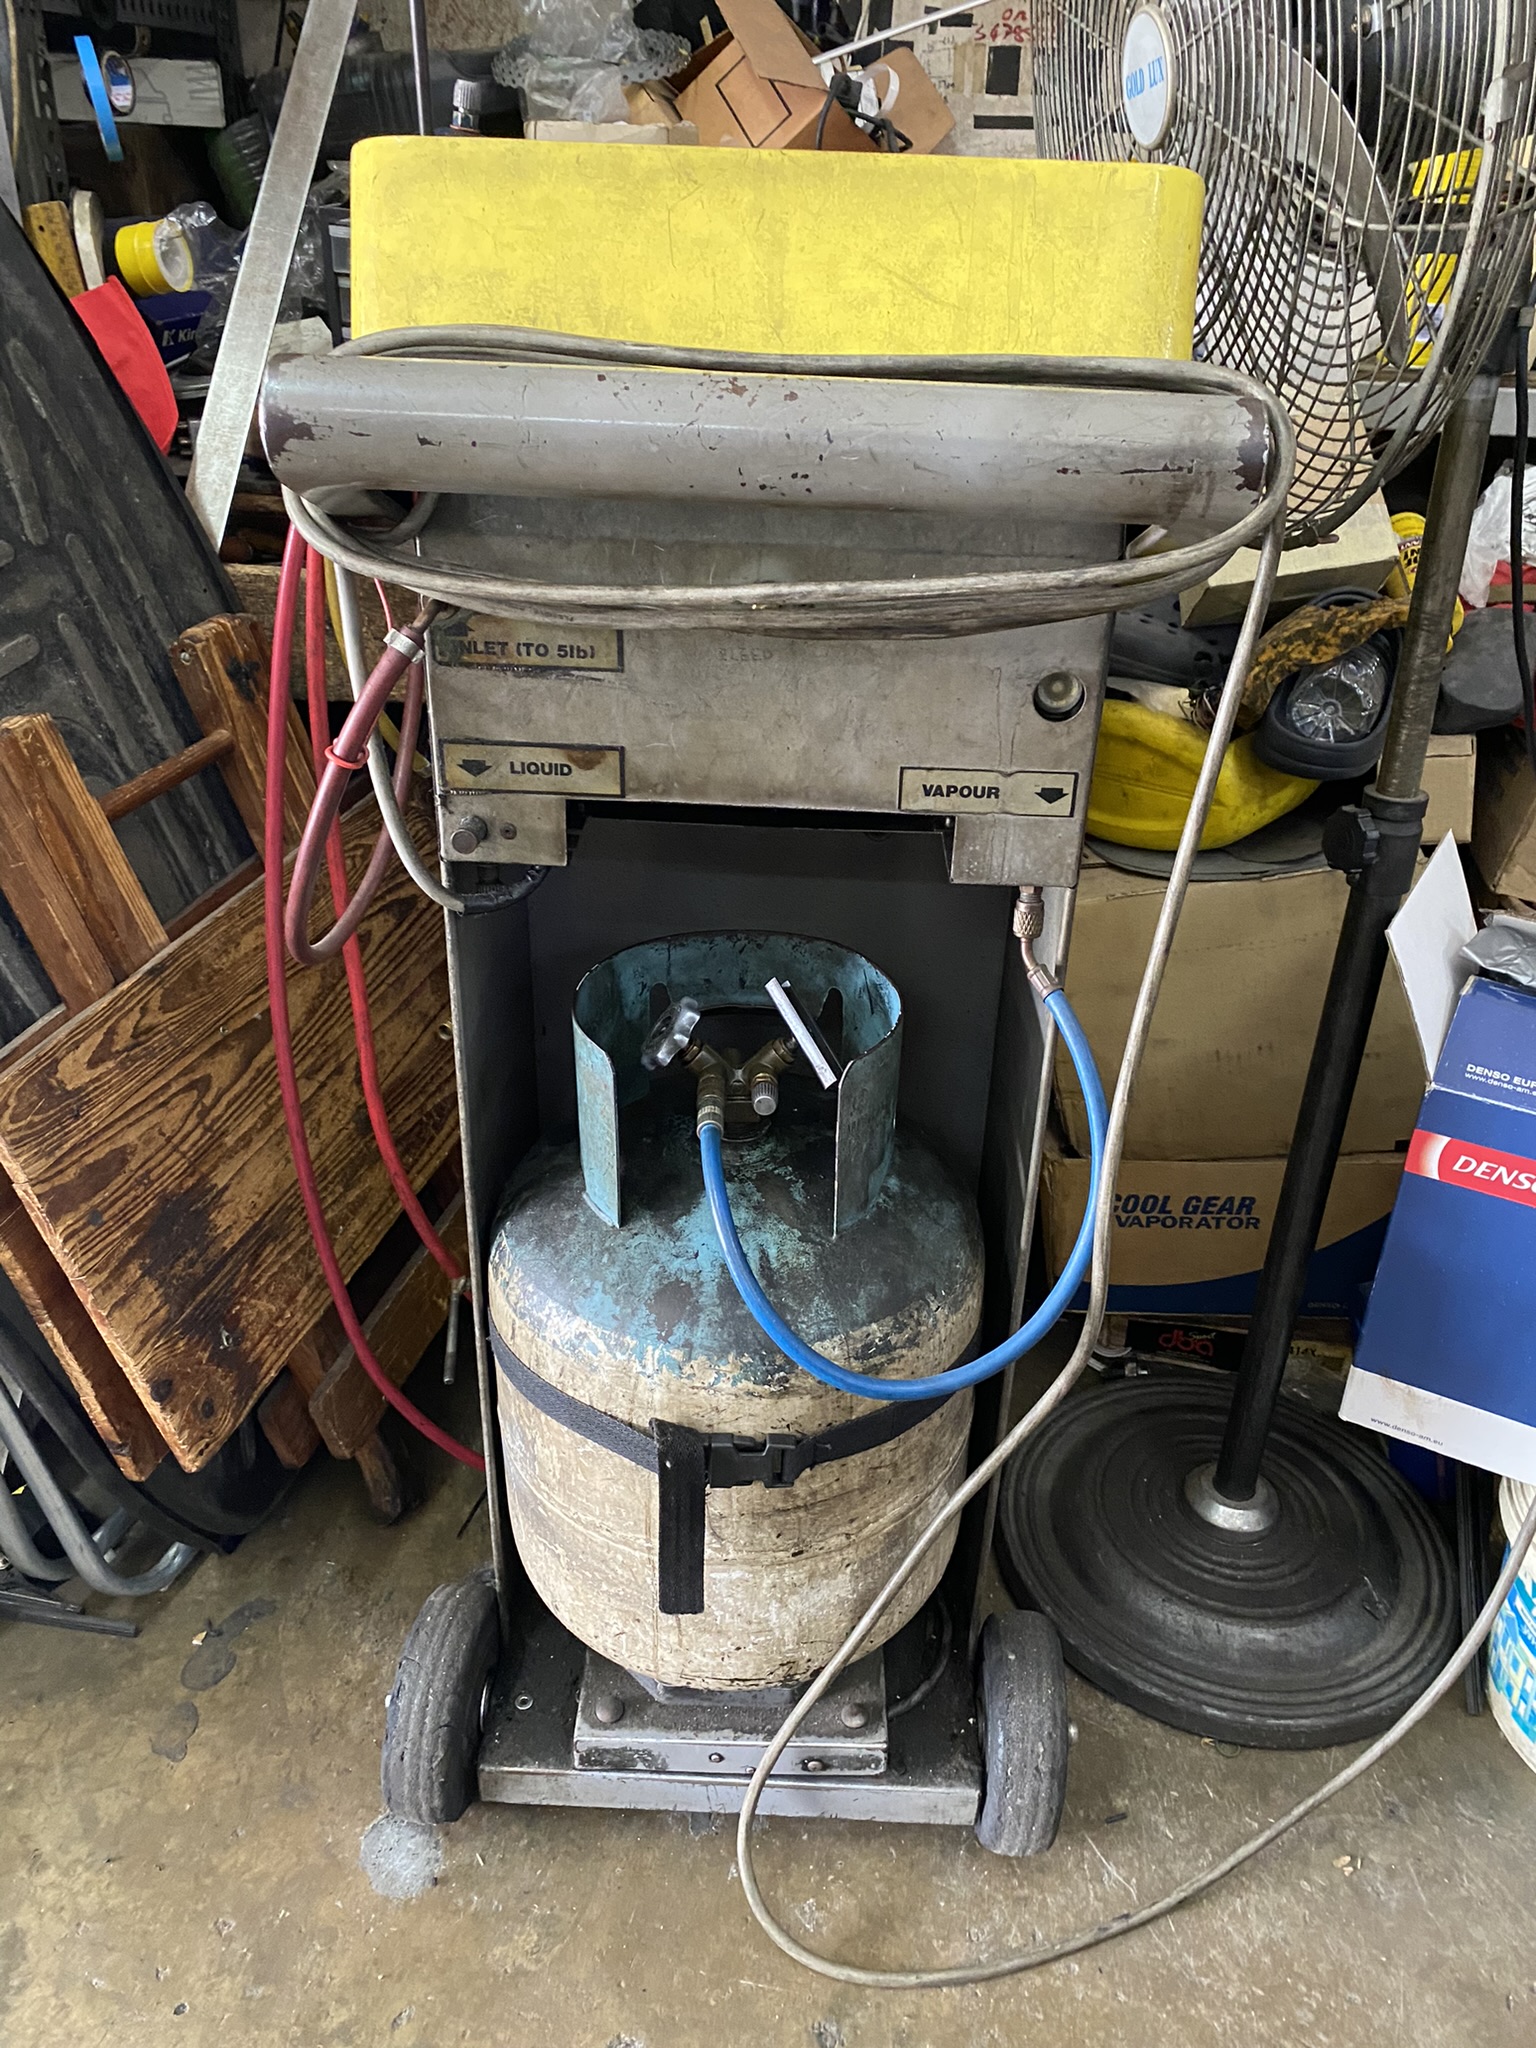 Free recovery machines like this one, in a Malaysian auto repair shop, are now in disrepair. Mechanics don't always have the money to replace them. Photo: Tilden Chao, 2023.